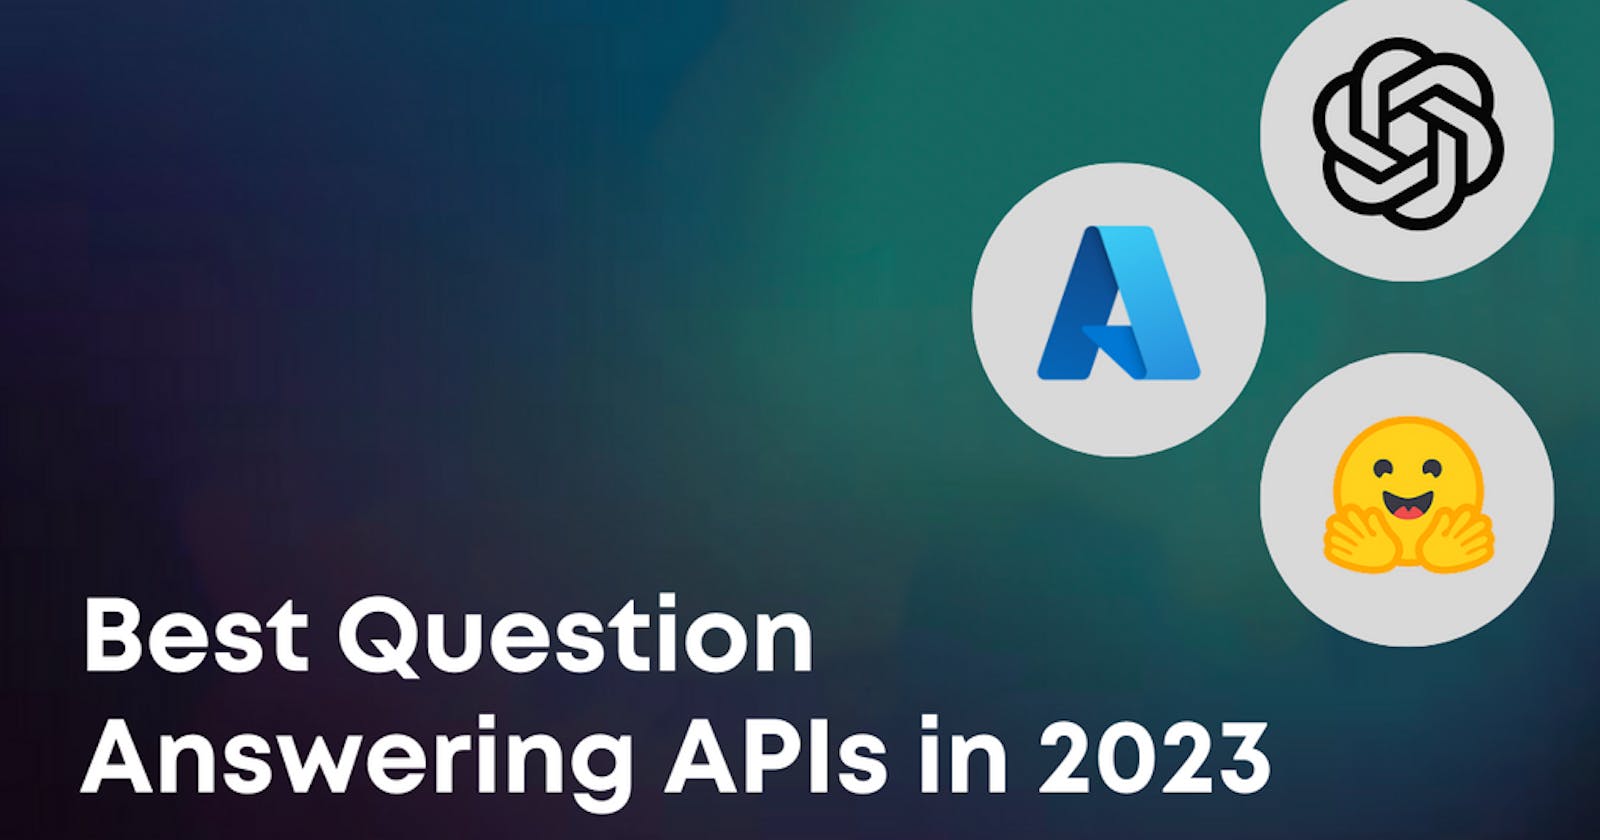 Best Question Answering APIs in 2023